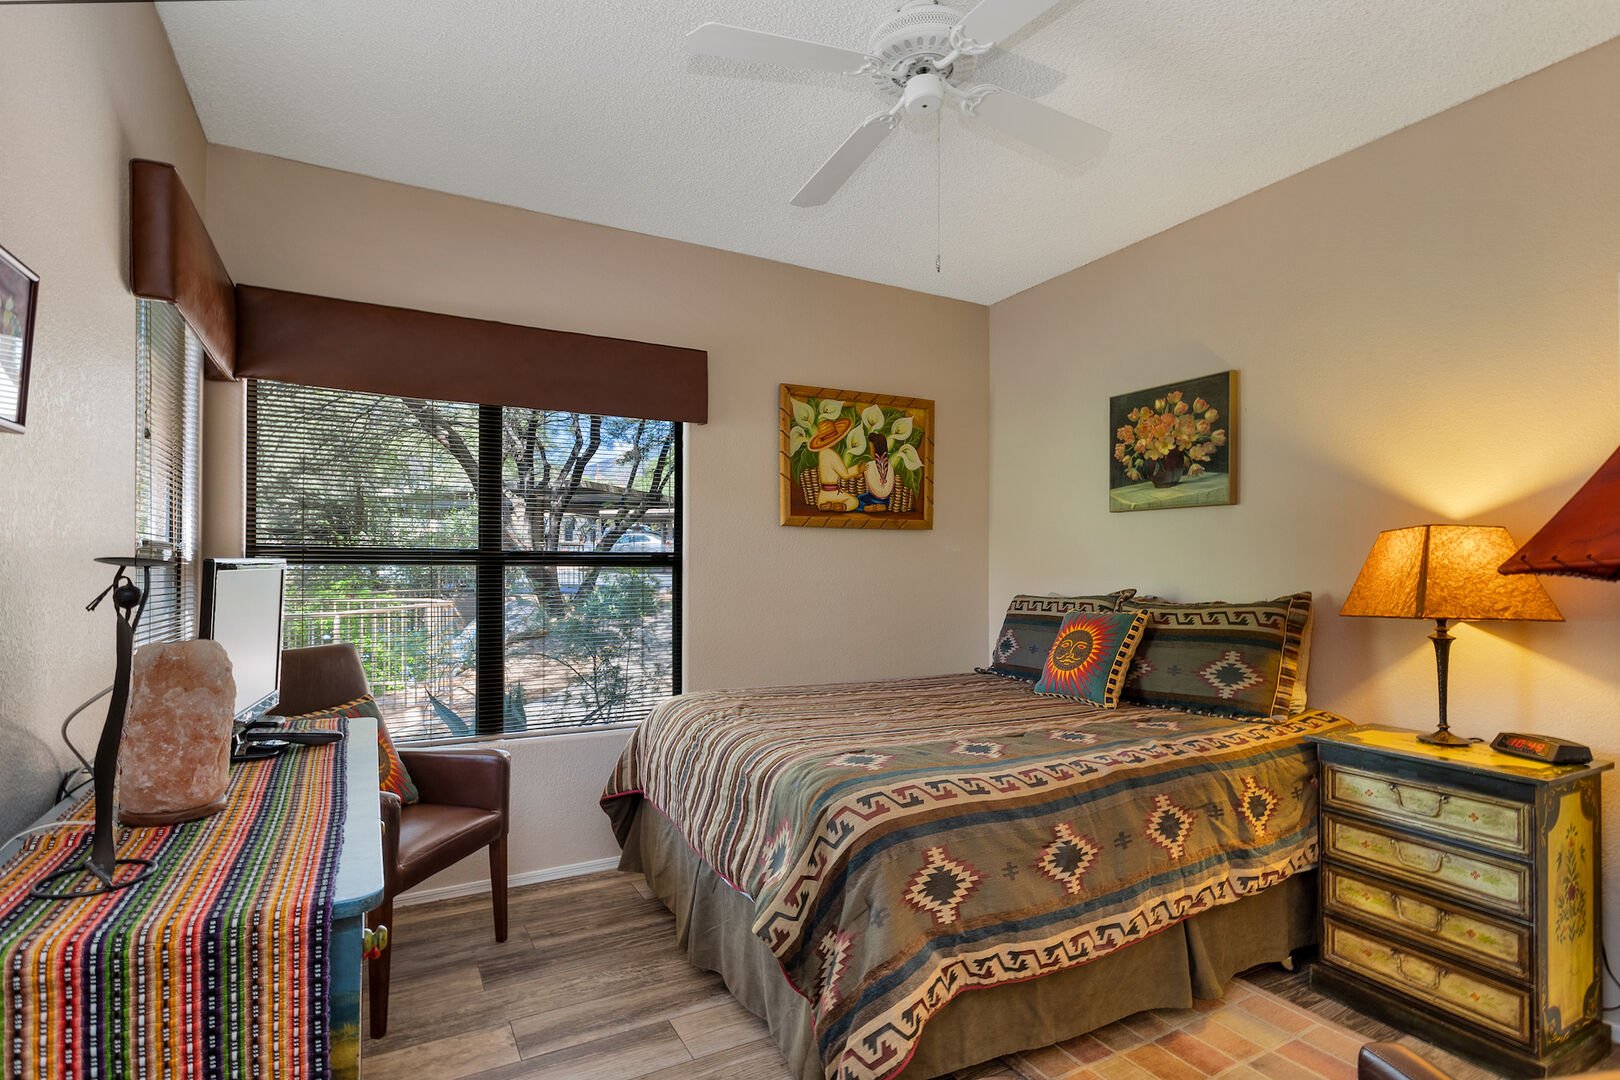 Second bedroom, great color schemes of the southwest